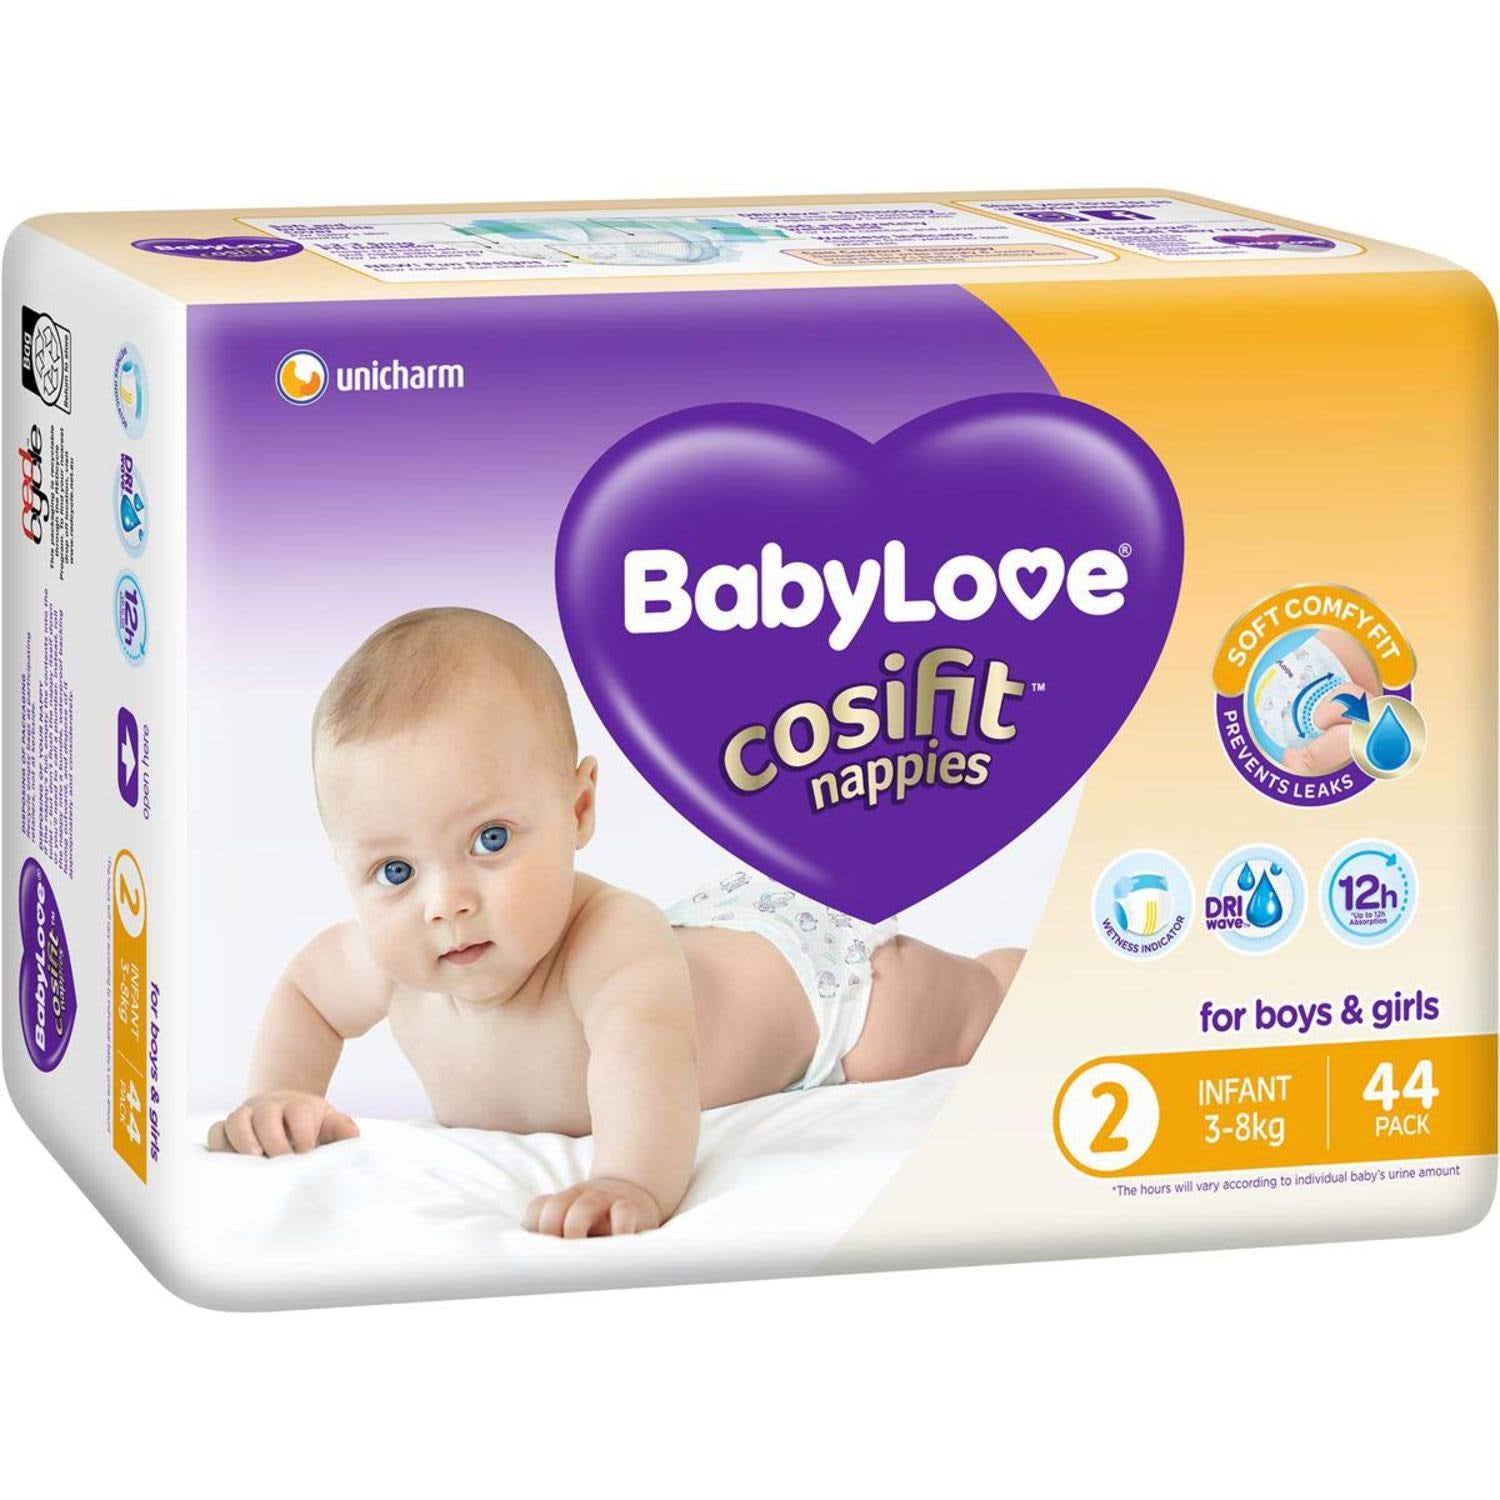 Babylove Nappies Infant Size 2 44pk